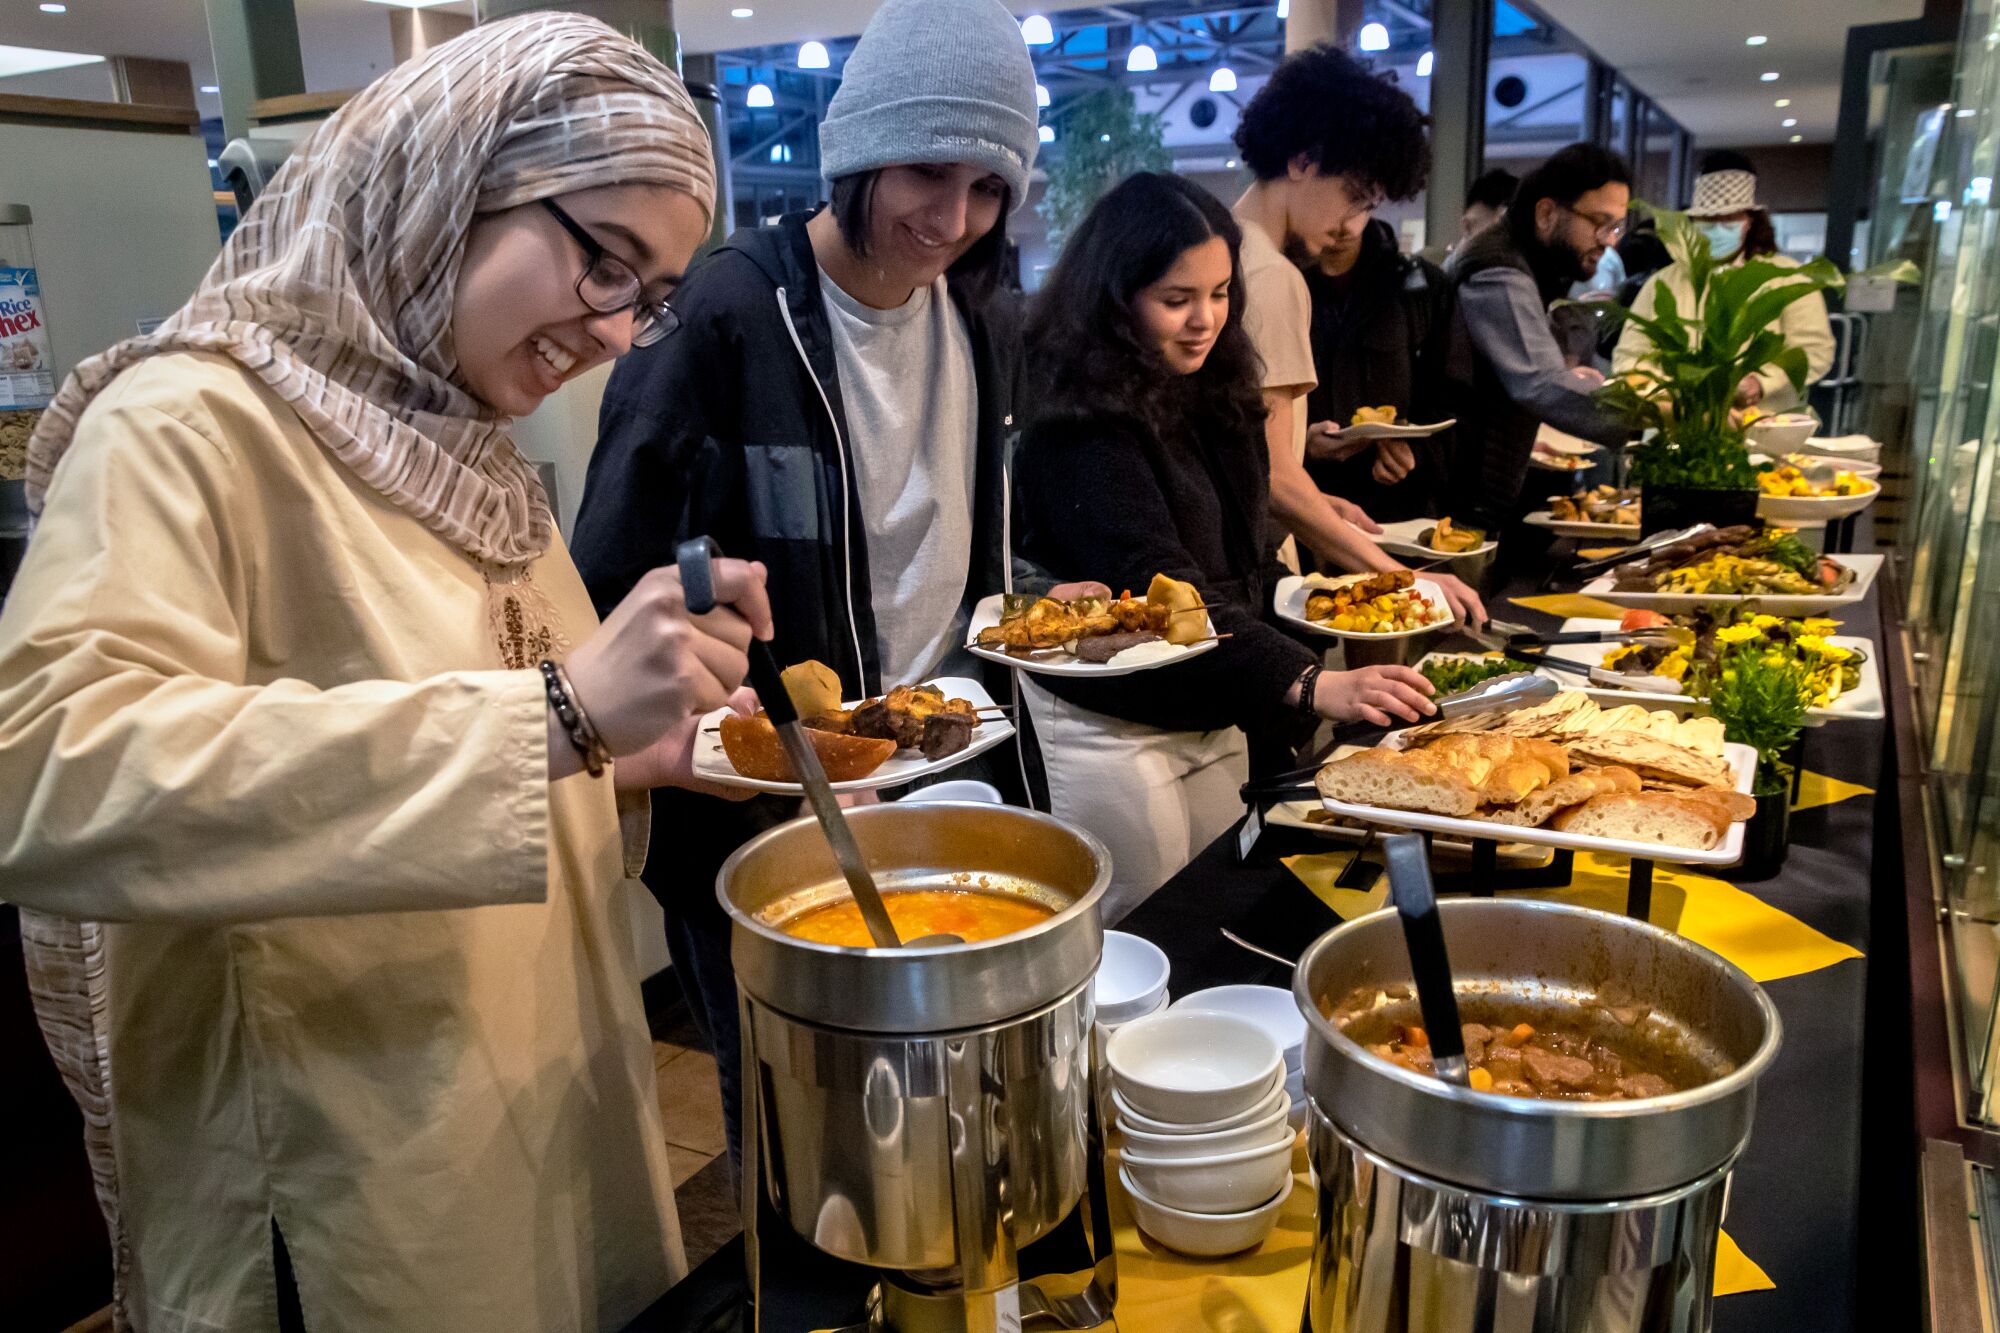 Claremont Colleges celebrate Ramadan in campus dining halls - Los Angeles  Times